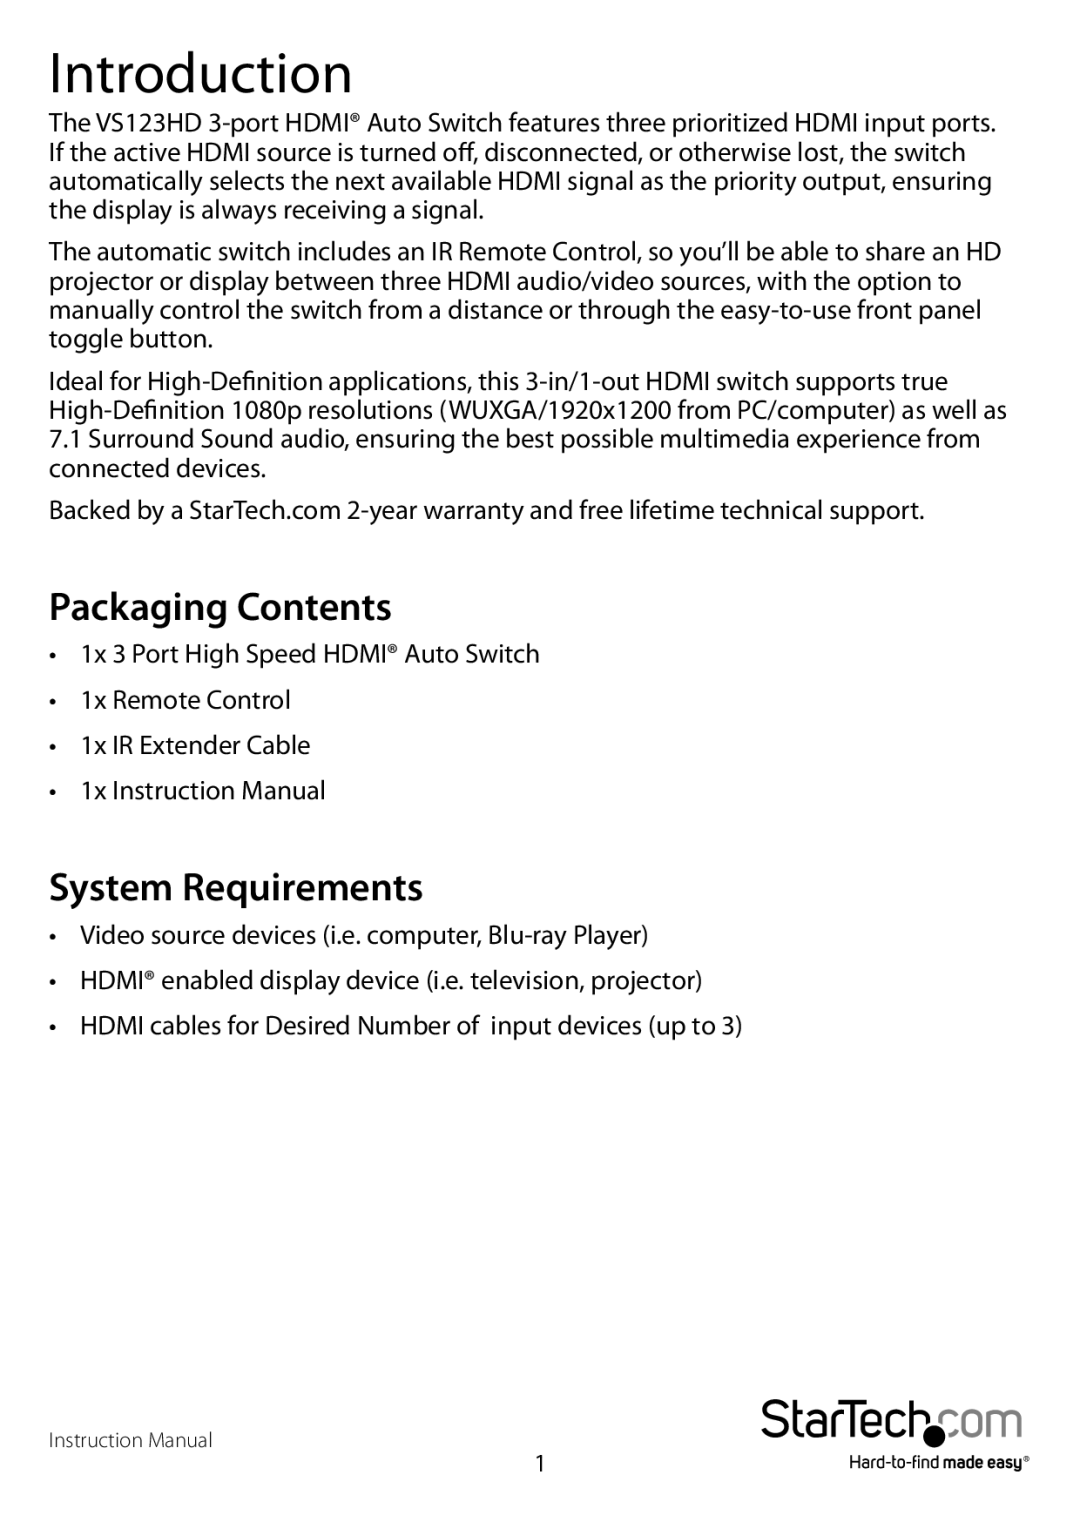 StarTech.com vs123HD manual Introduction, Packaging Contents, System Requirements 